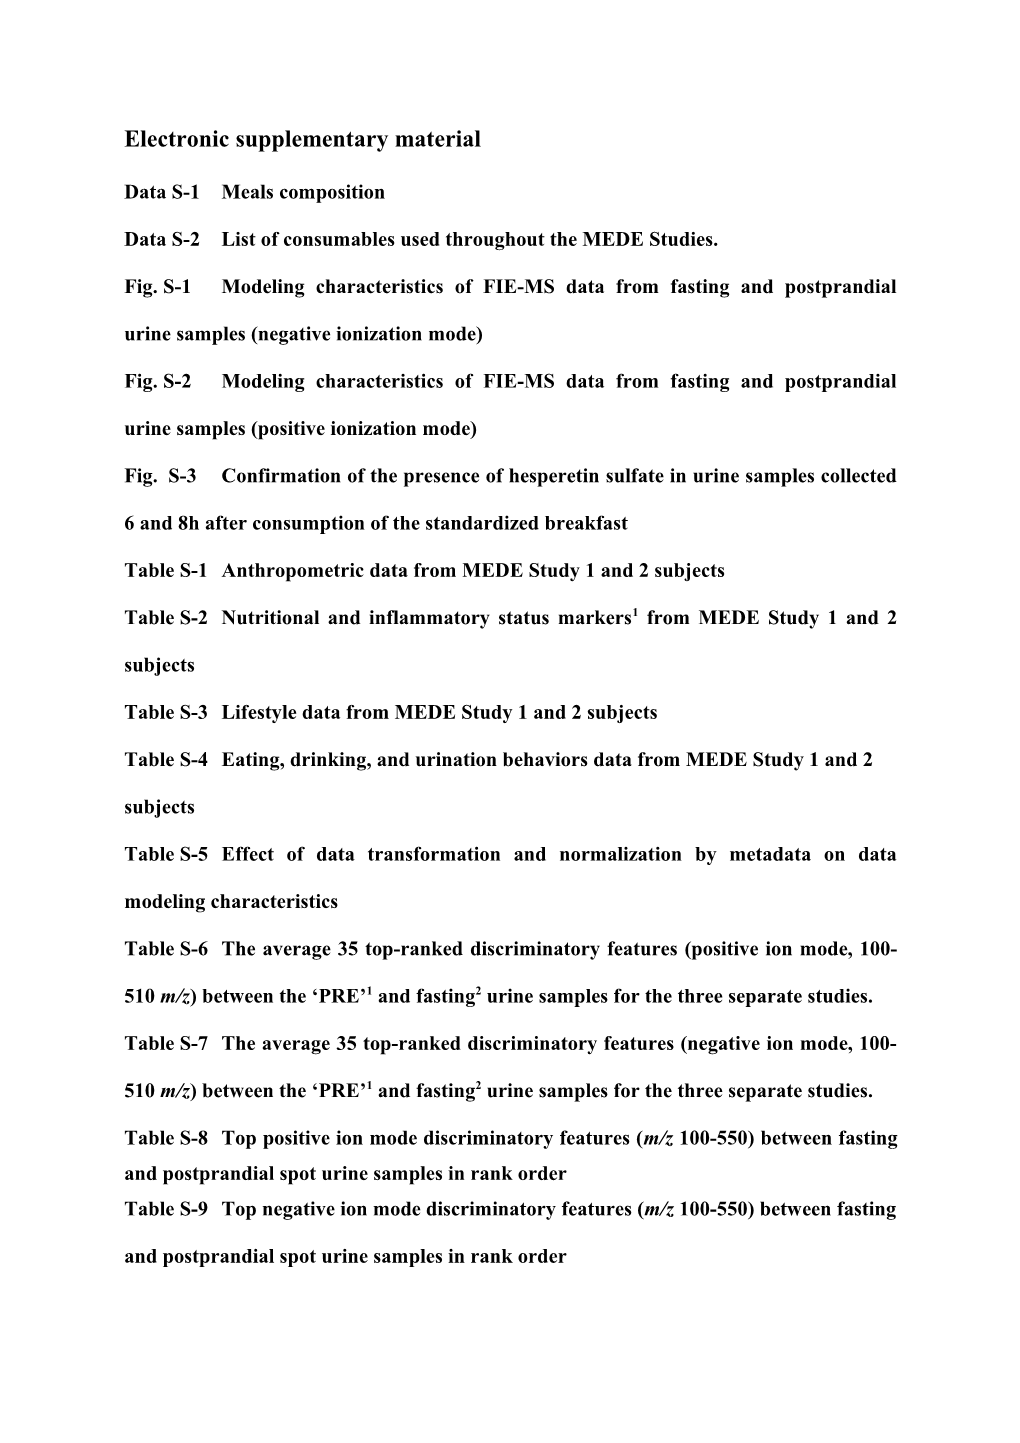 Data S-2 List of Consumables Used Throughout the MEDE Studies